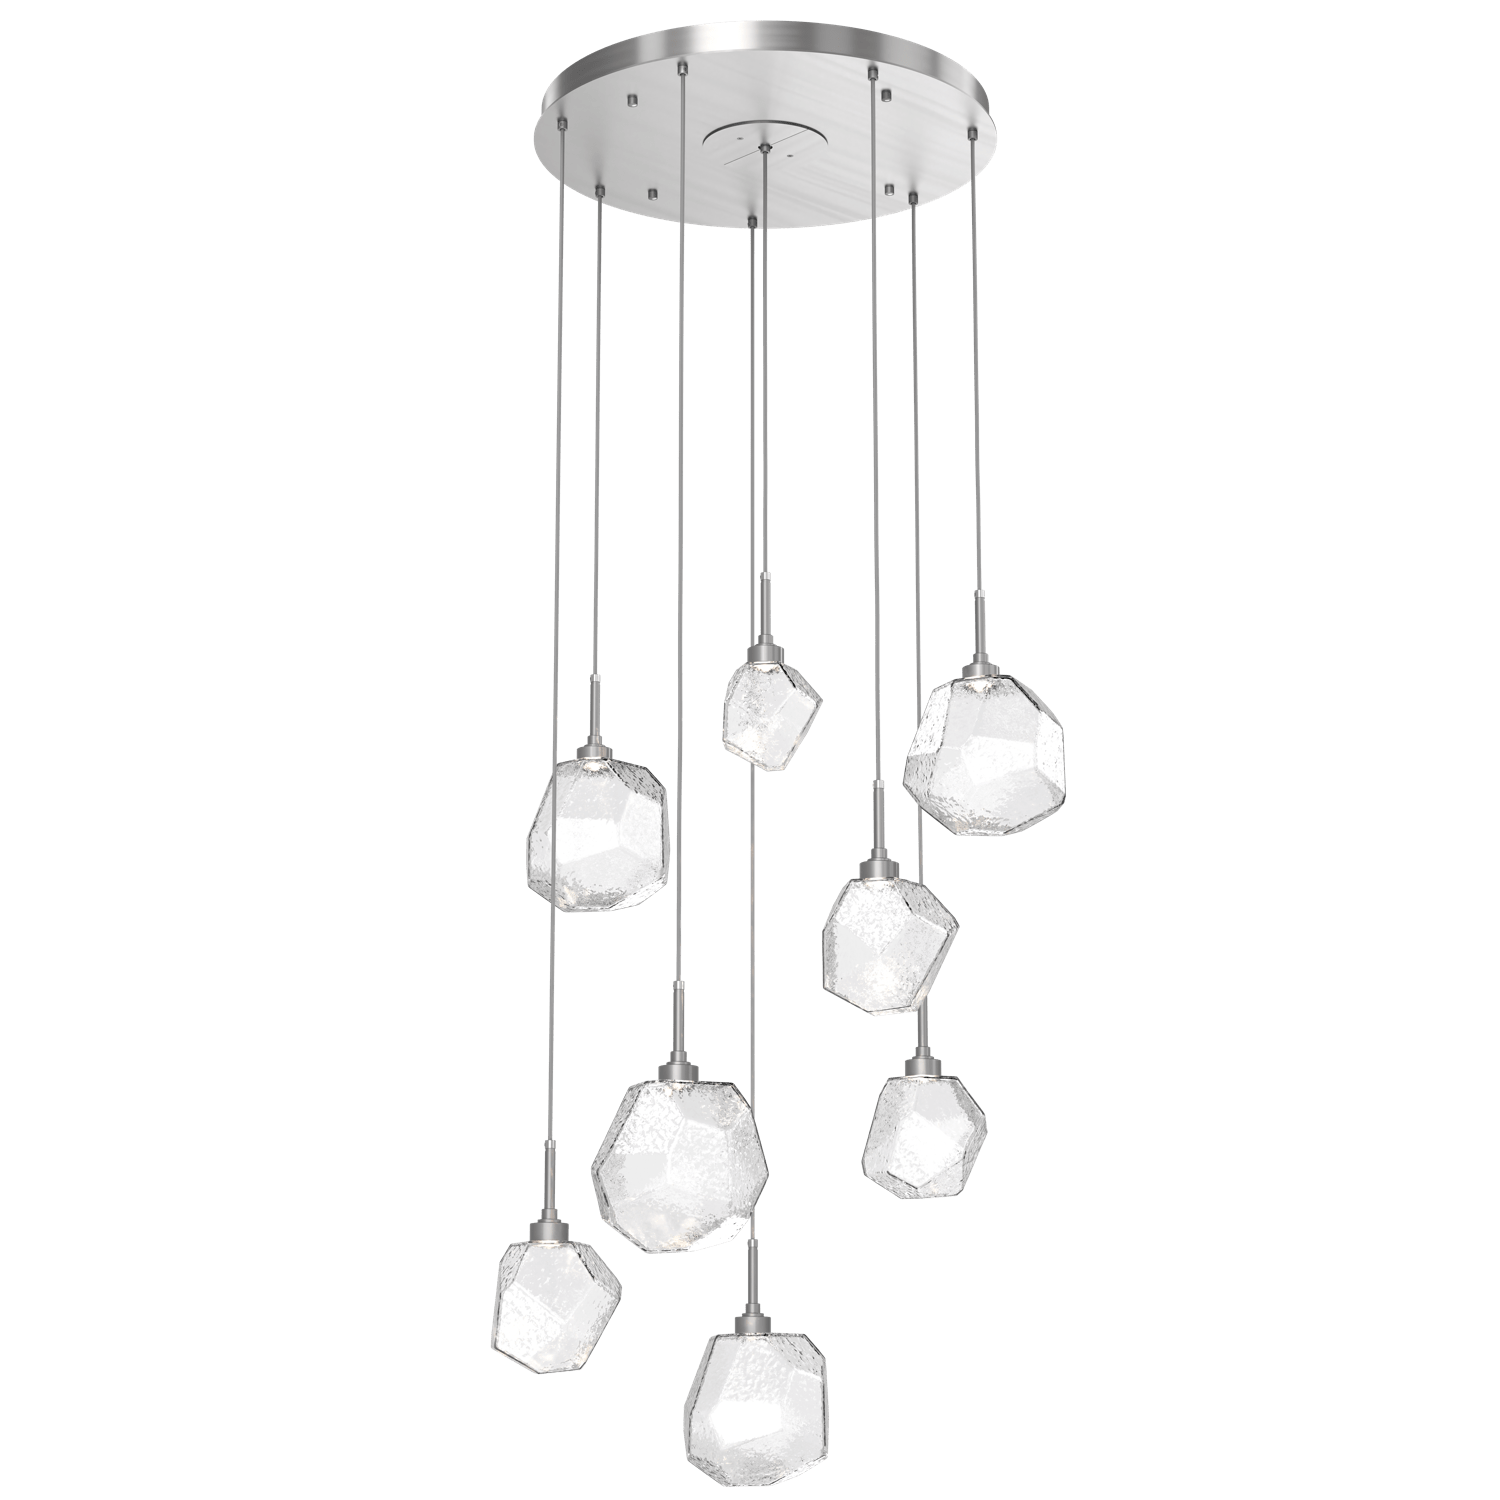 CHB0039-08-SN-C-Hammerton-Studio-Gem-8-light-round-pendant-chandelier-with-satin-nickel-finish-and-clear-blown-glass-shades-and-LED-lamping